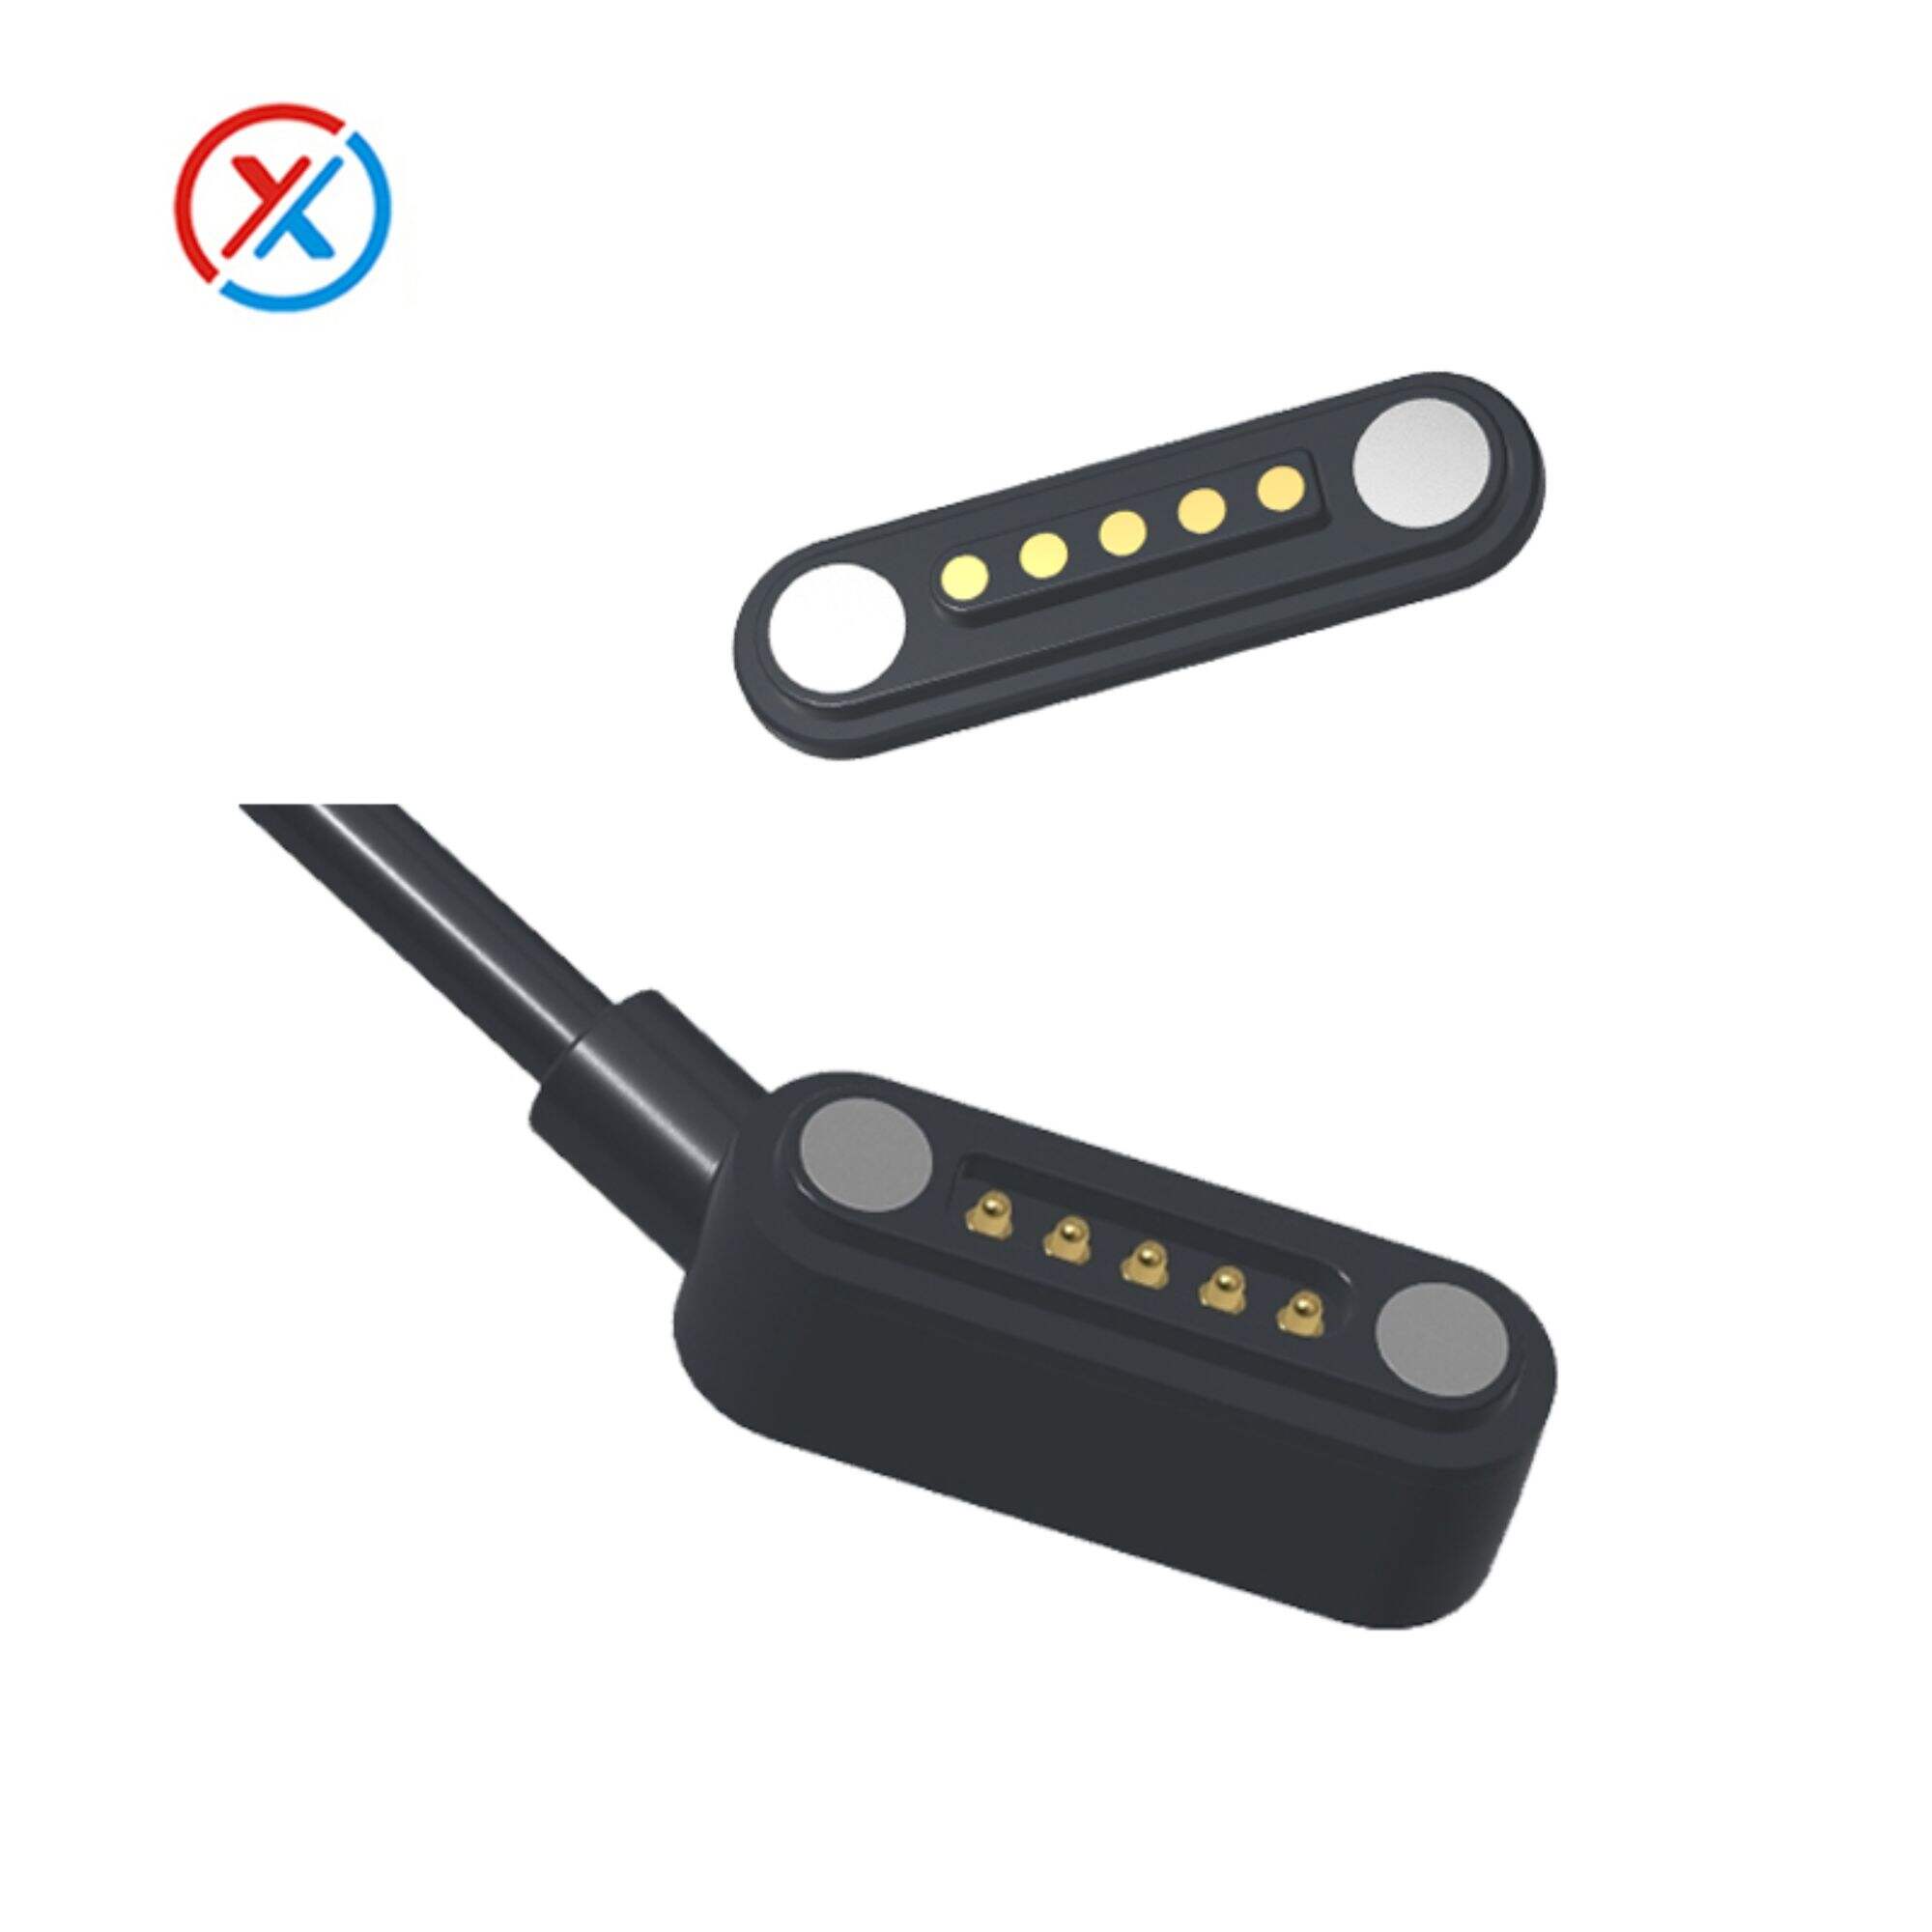 2-pin long magnetic USB charging wire is suitable for the male and female base of magnetic suction power cord of LED lamp in smart home